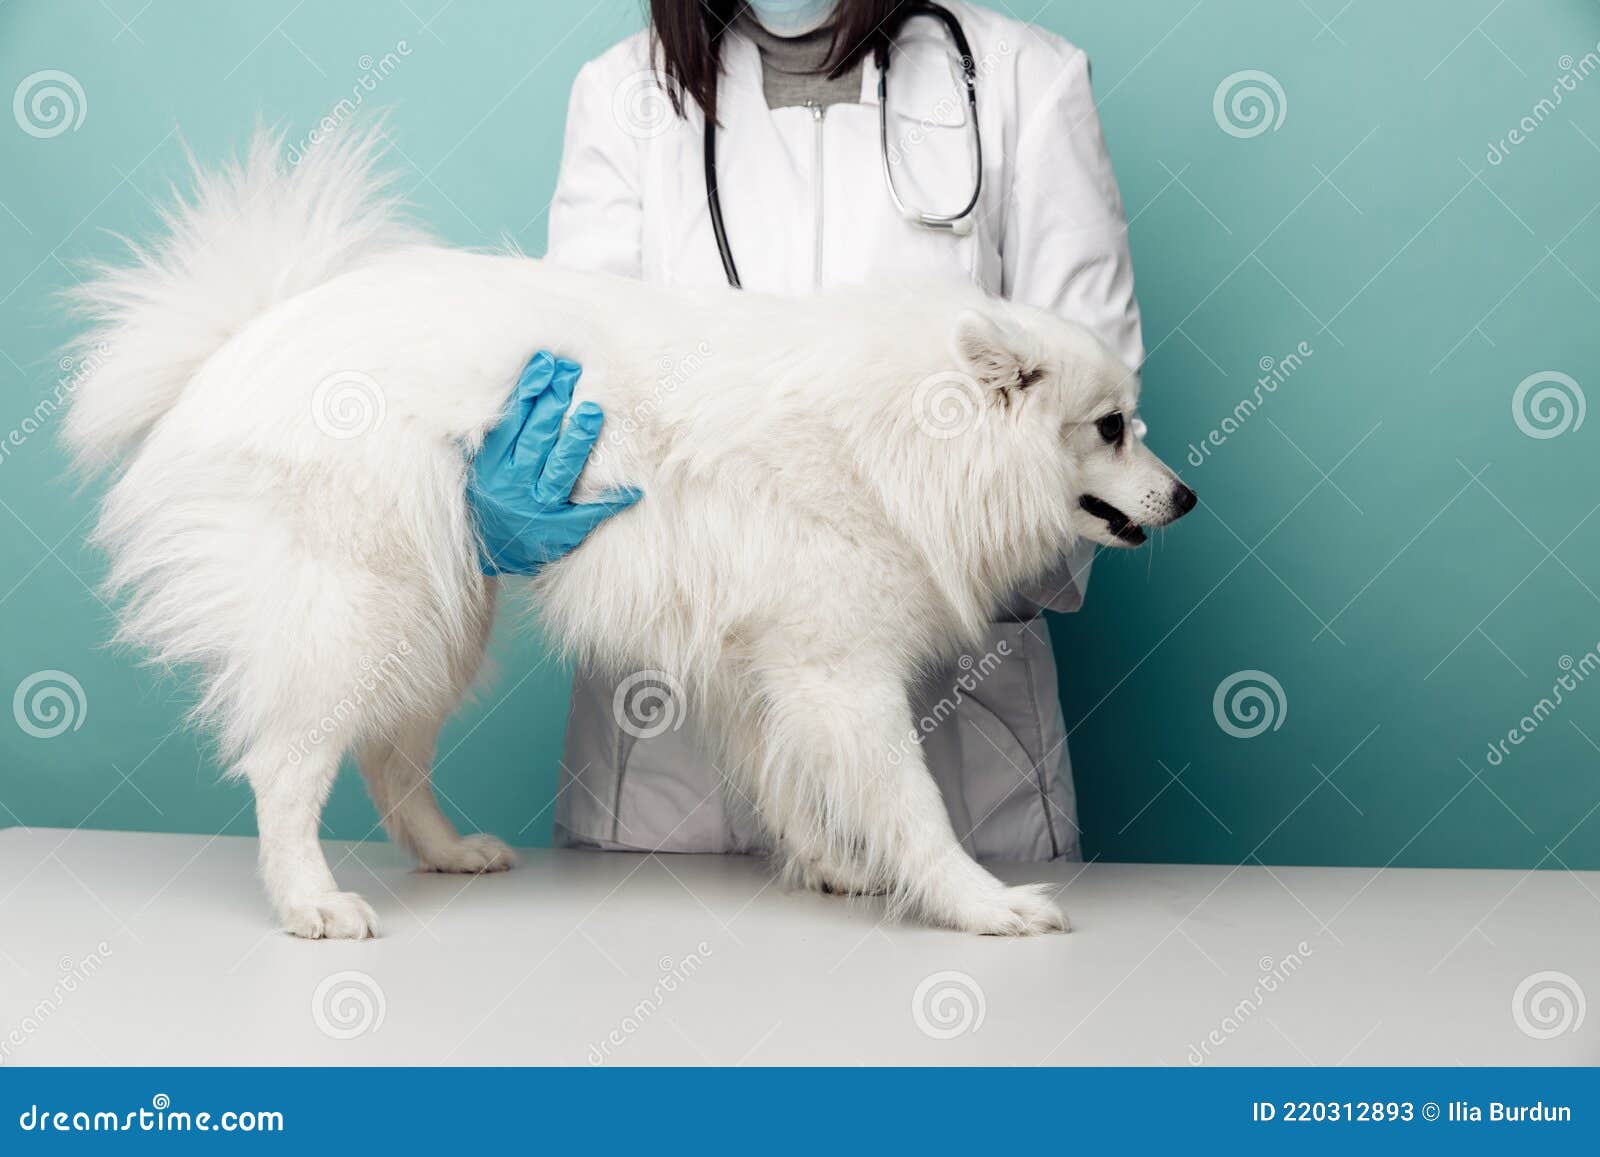 Veterinary in Uniform Checks the White Dog on the Table in Vet Clinic on  Blue Background Stock Image - Image of inspection, pain: 220312893